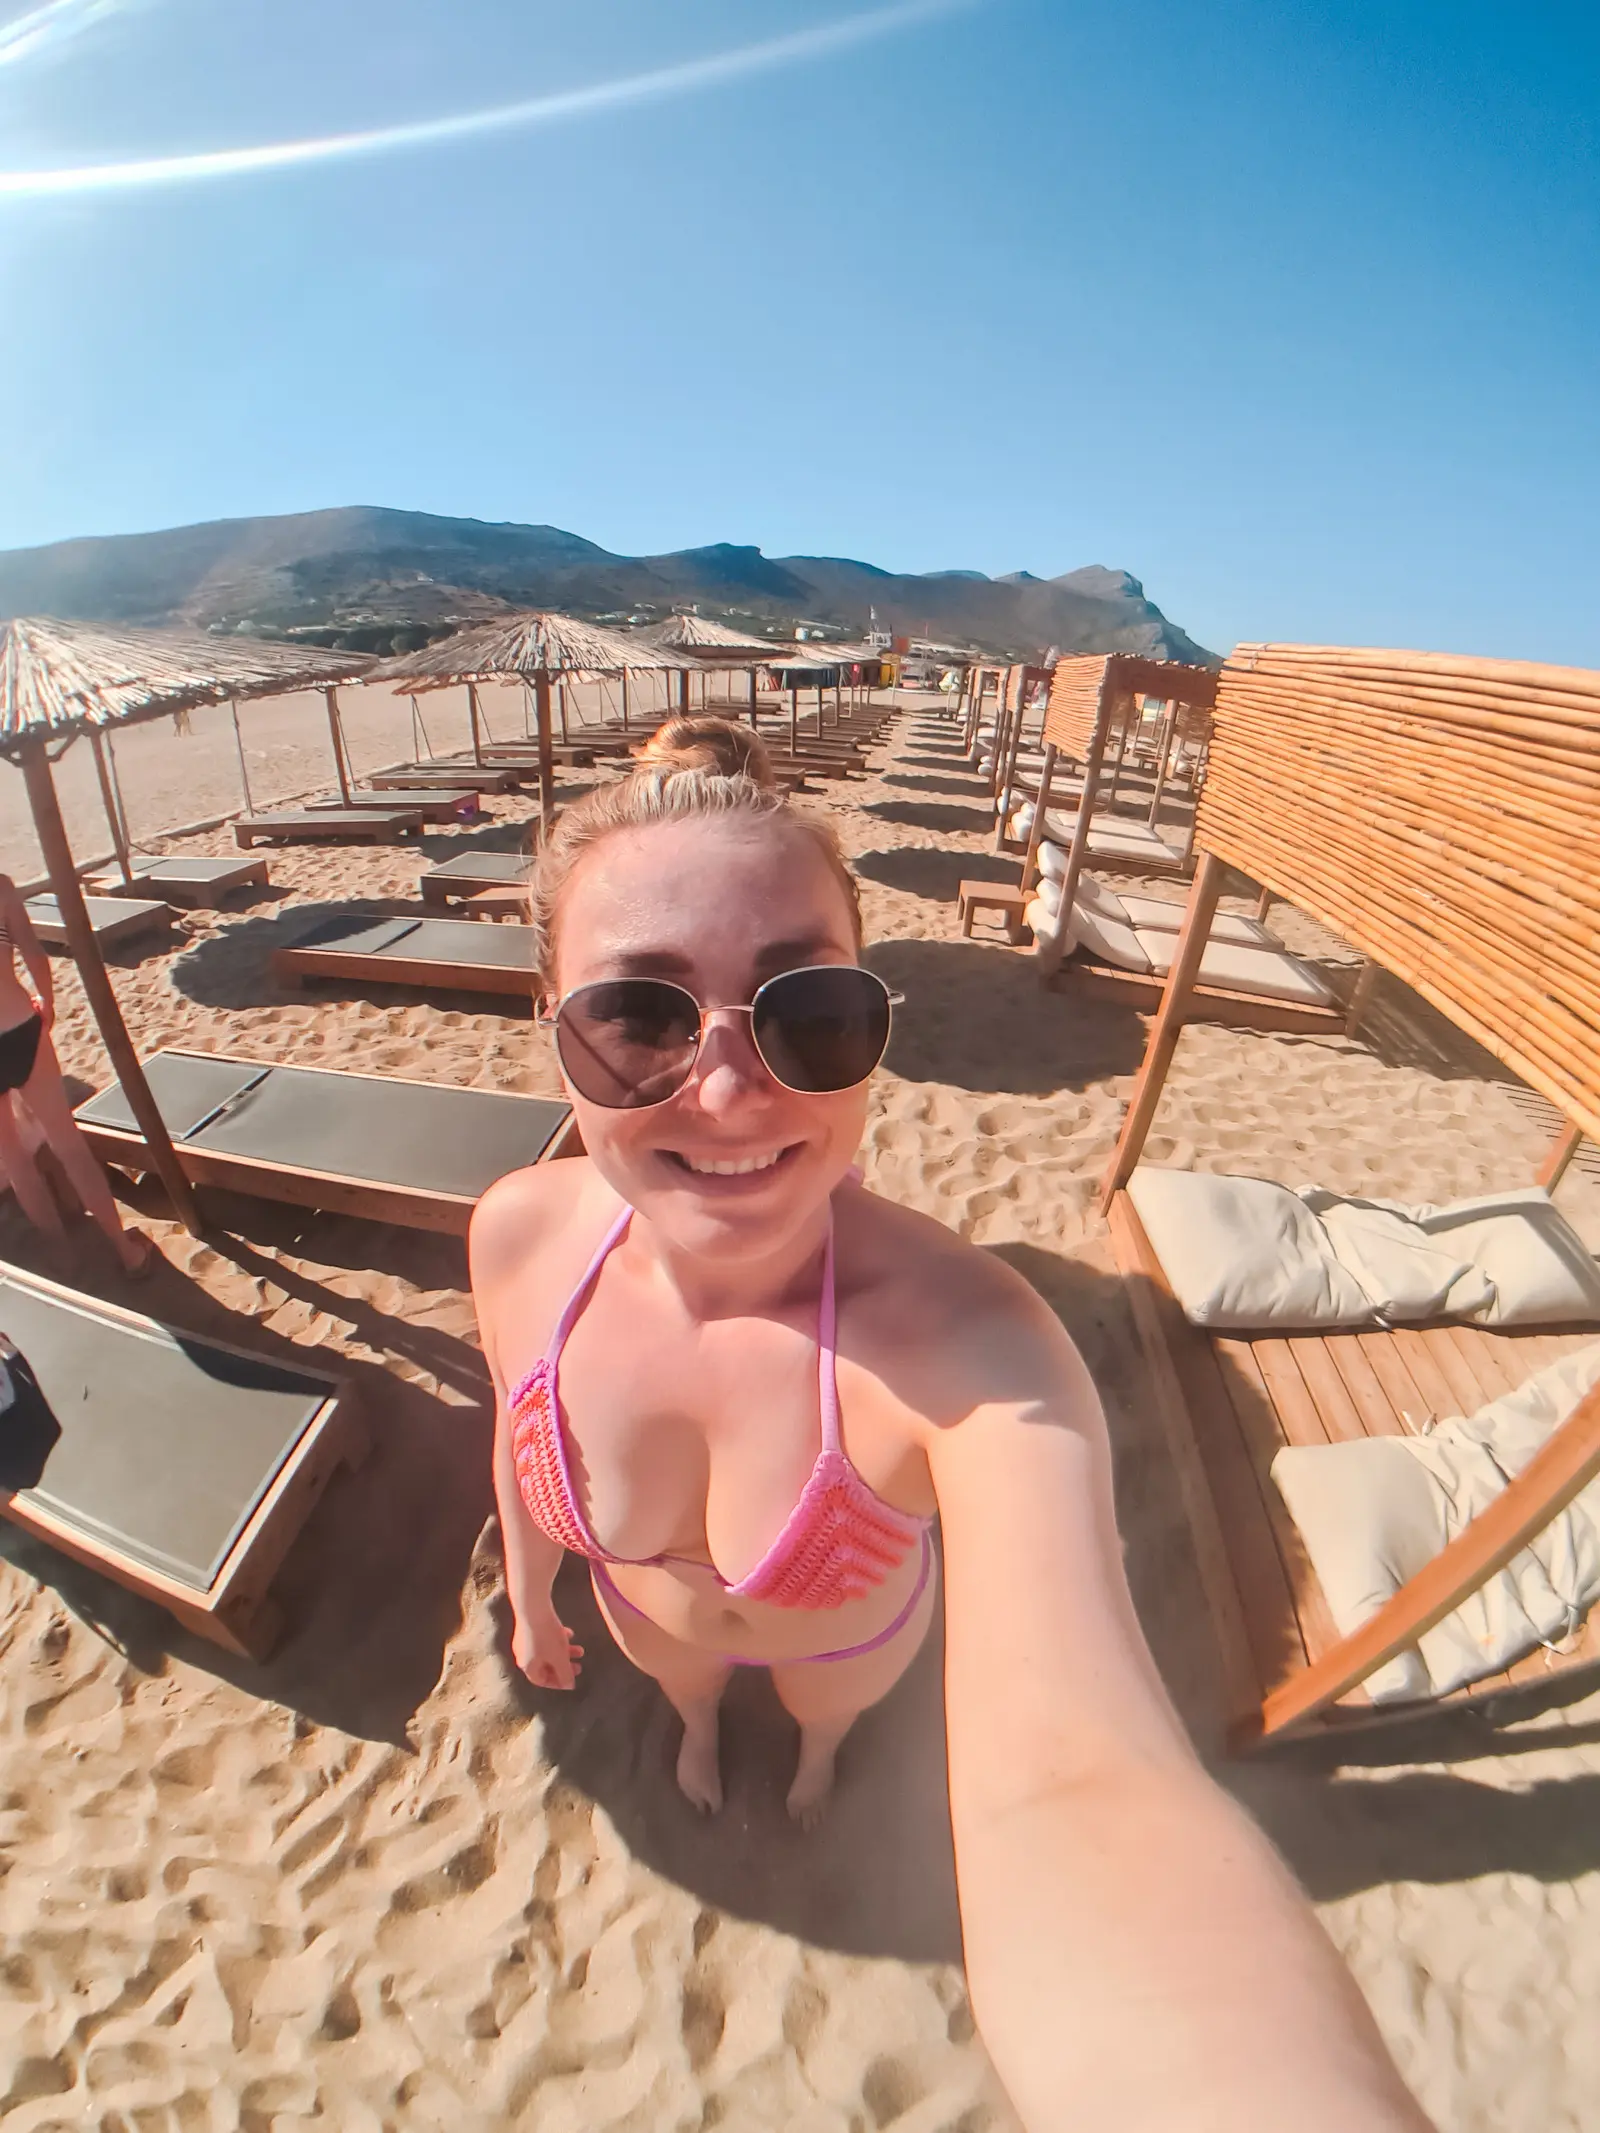 Girl with large circular sunglasses, wearing a purple bikini, smiling while taking a selfie with cabanas and sunbeds at Falassarna Beach in the background.